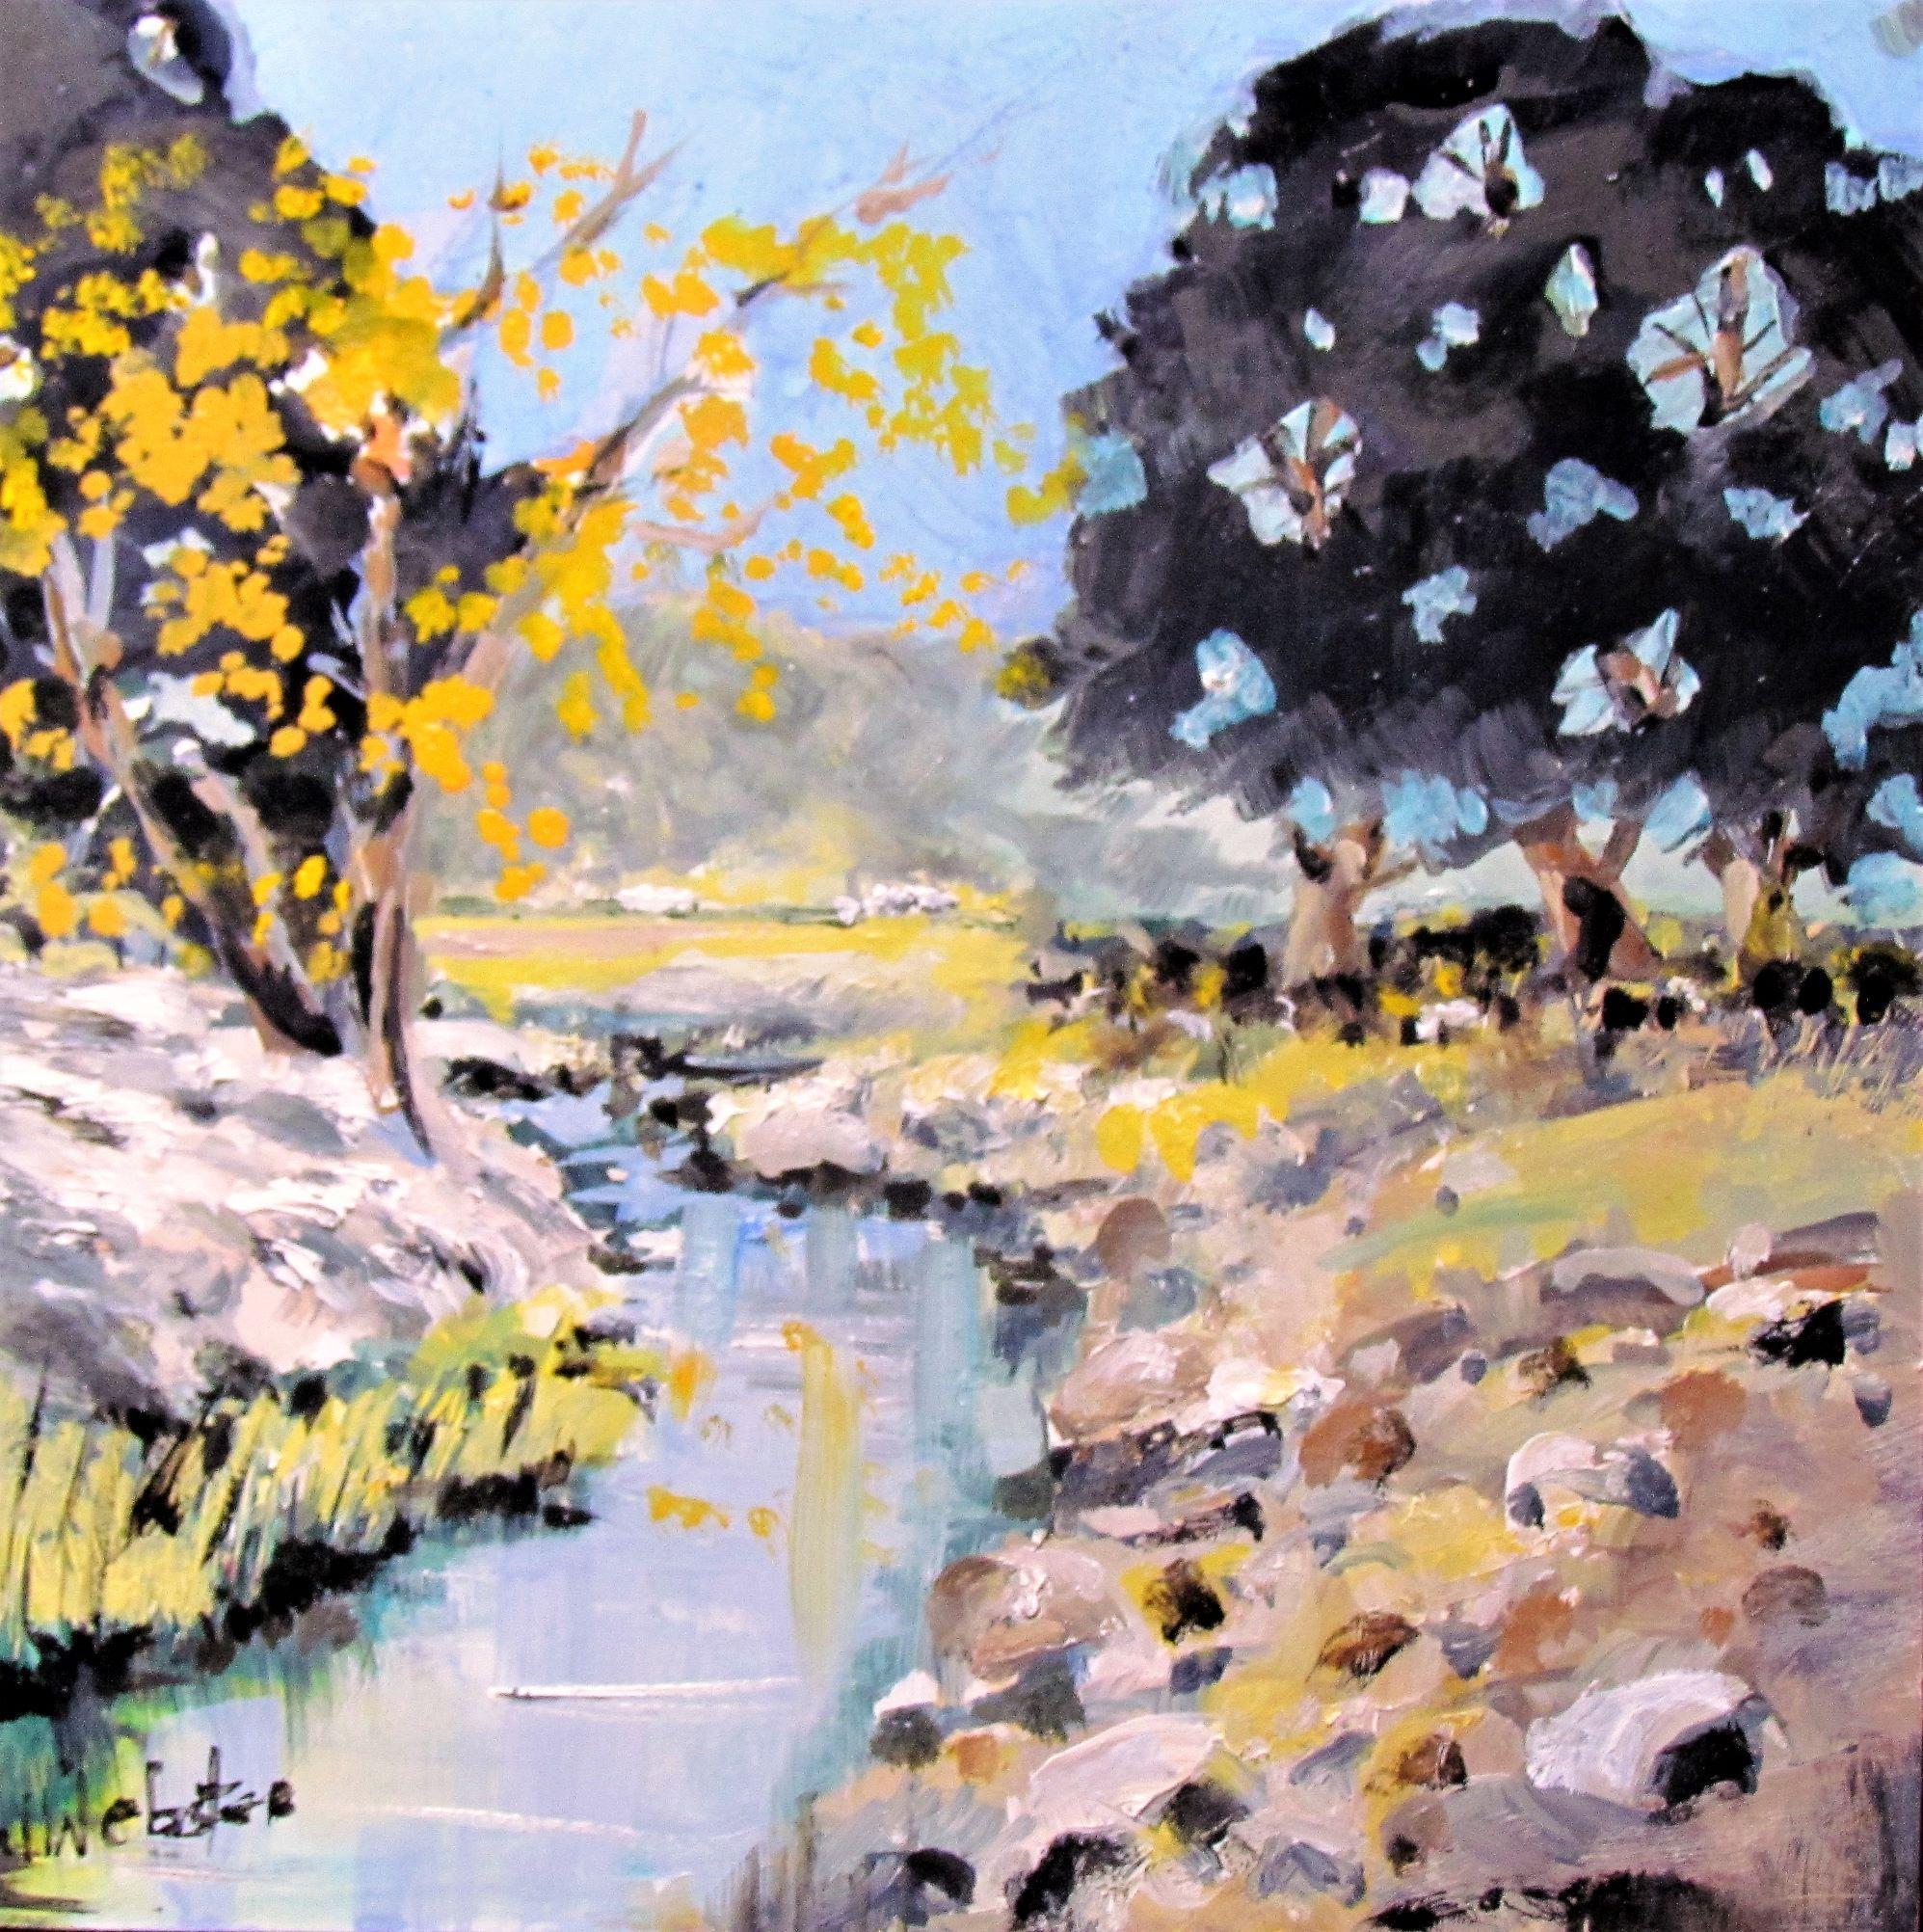 William Webster Landscape Painting - A California Creek, Painting, Oil on Wood Panel